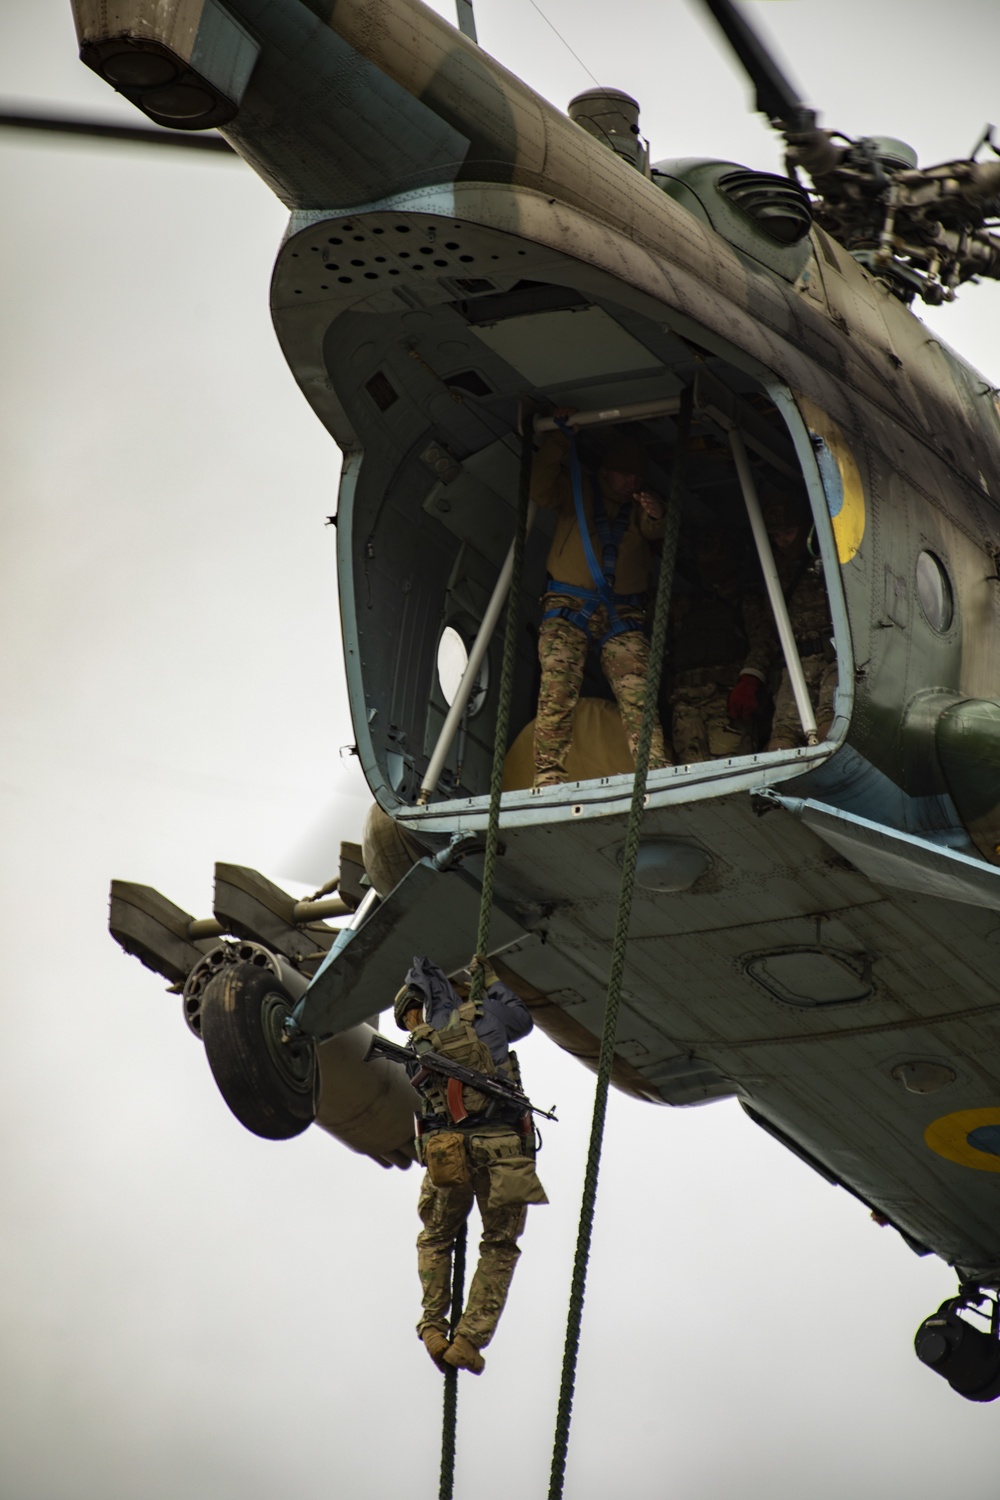 Ukrainian soldiers fast rope from a MI-8 helicopter